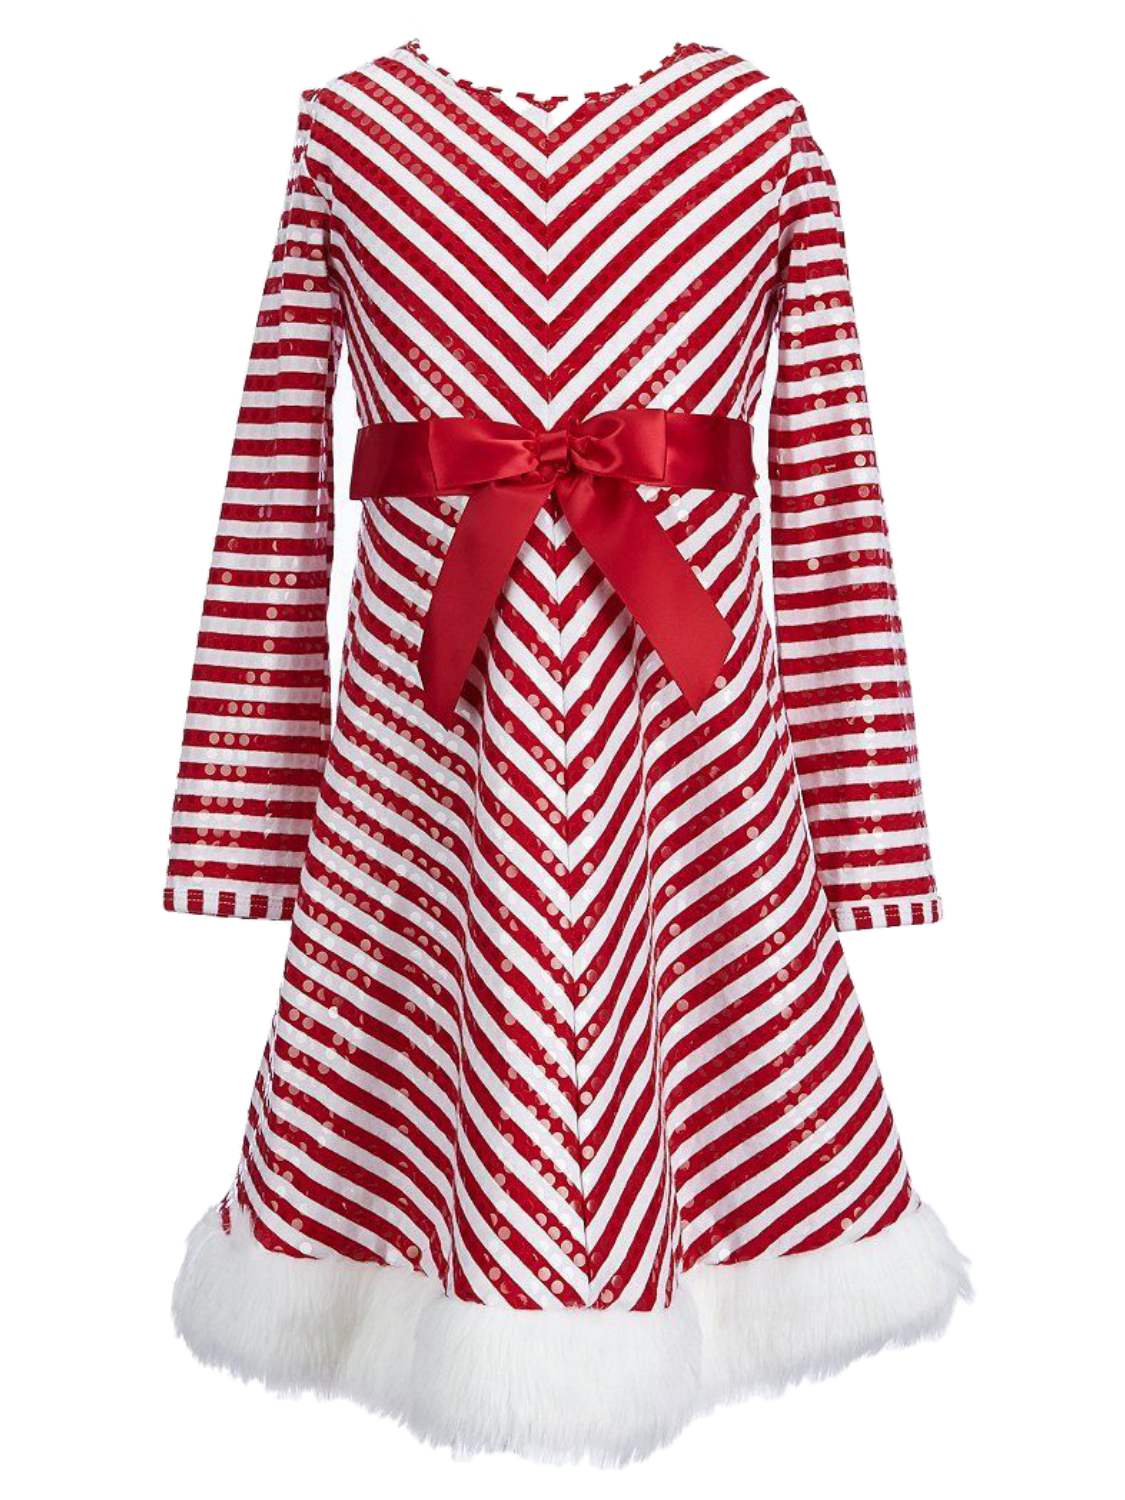 Bonnie Jean Infant Girls Red & White Candycane Stripe Sequin Christmas Holiday Party Dress